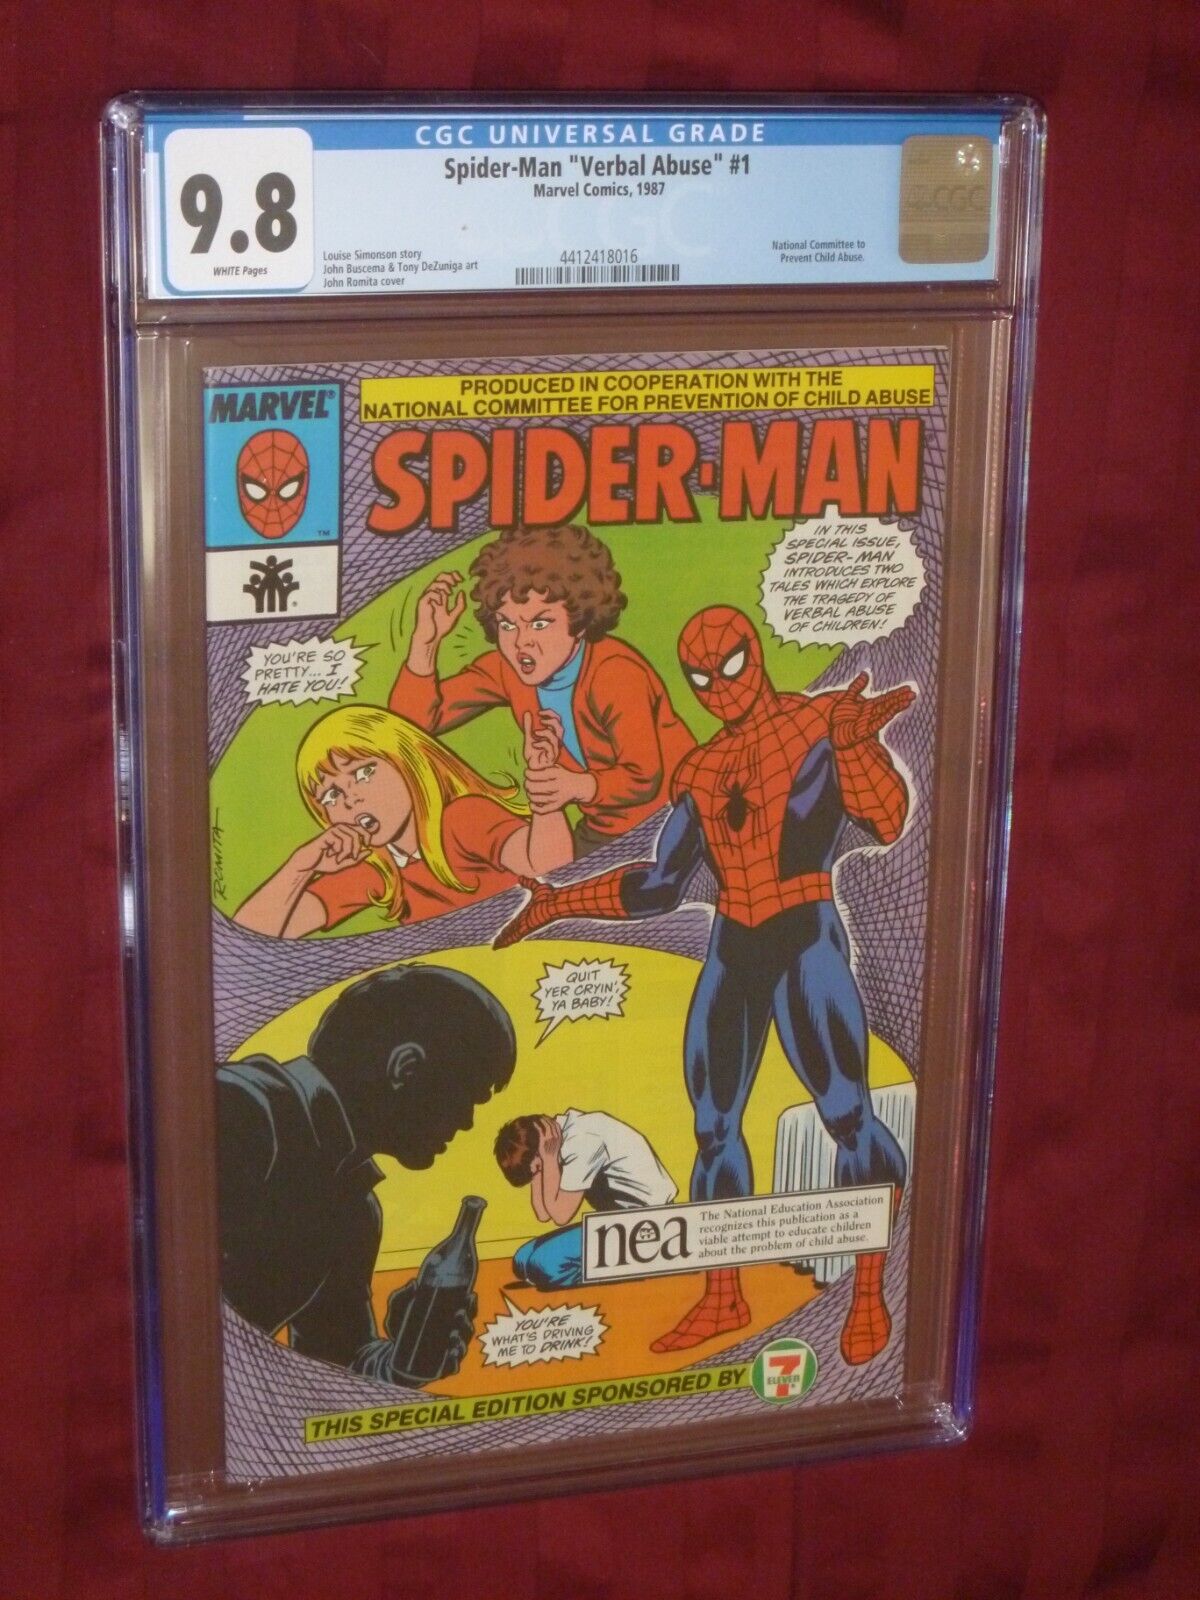 Spider-Man Verbal Abuse #1 CGC 9.8 comic, Child Abuse promo sponsored by 7/11